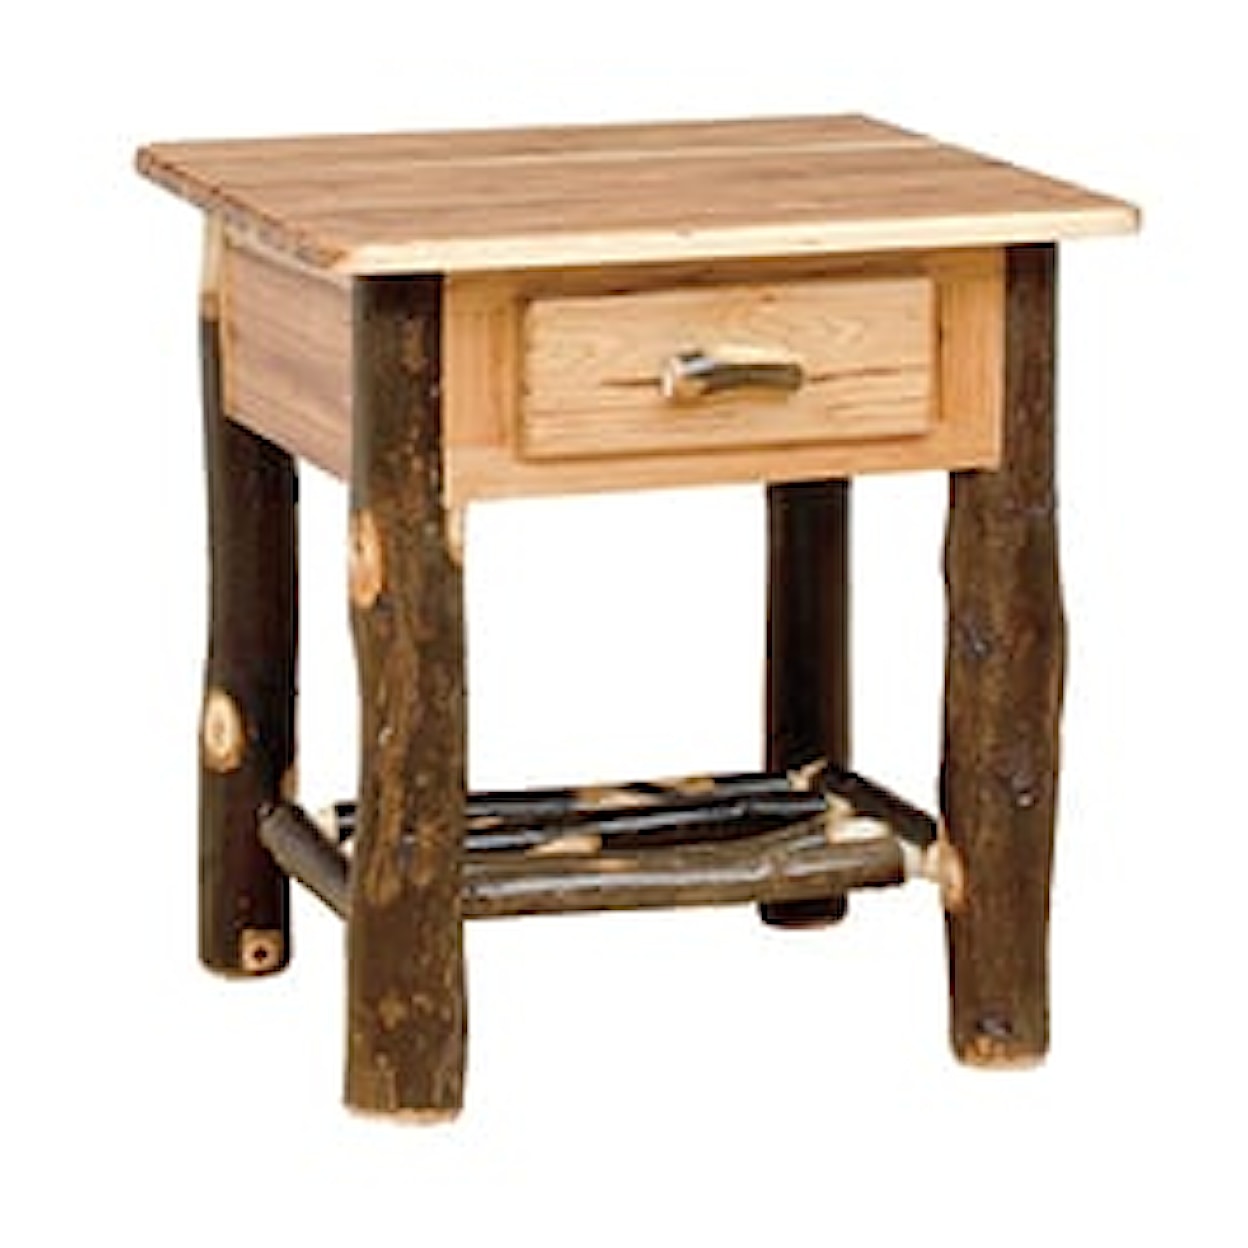 Byler's Rustic Furniture Hickory Collection Nightstand